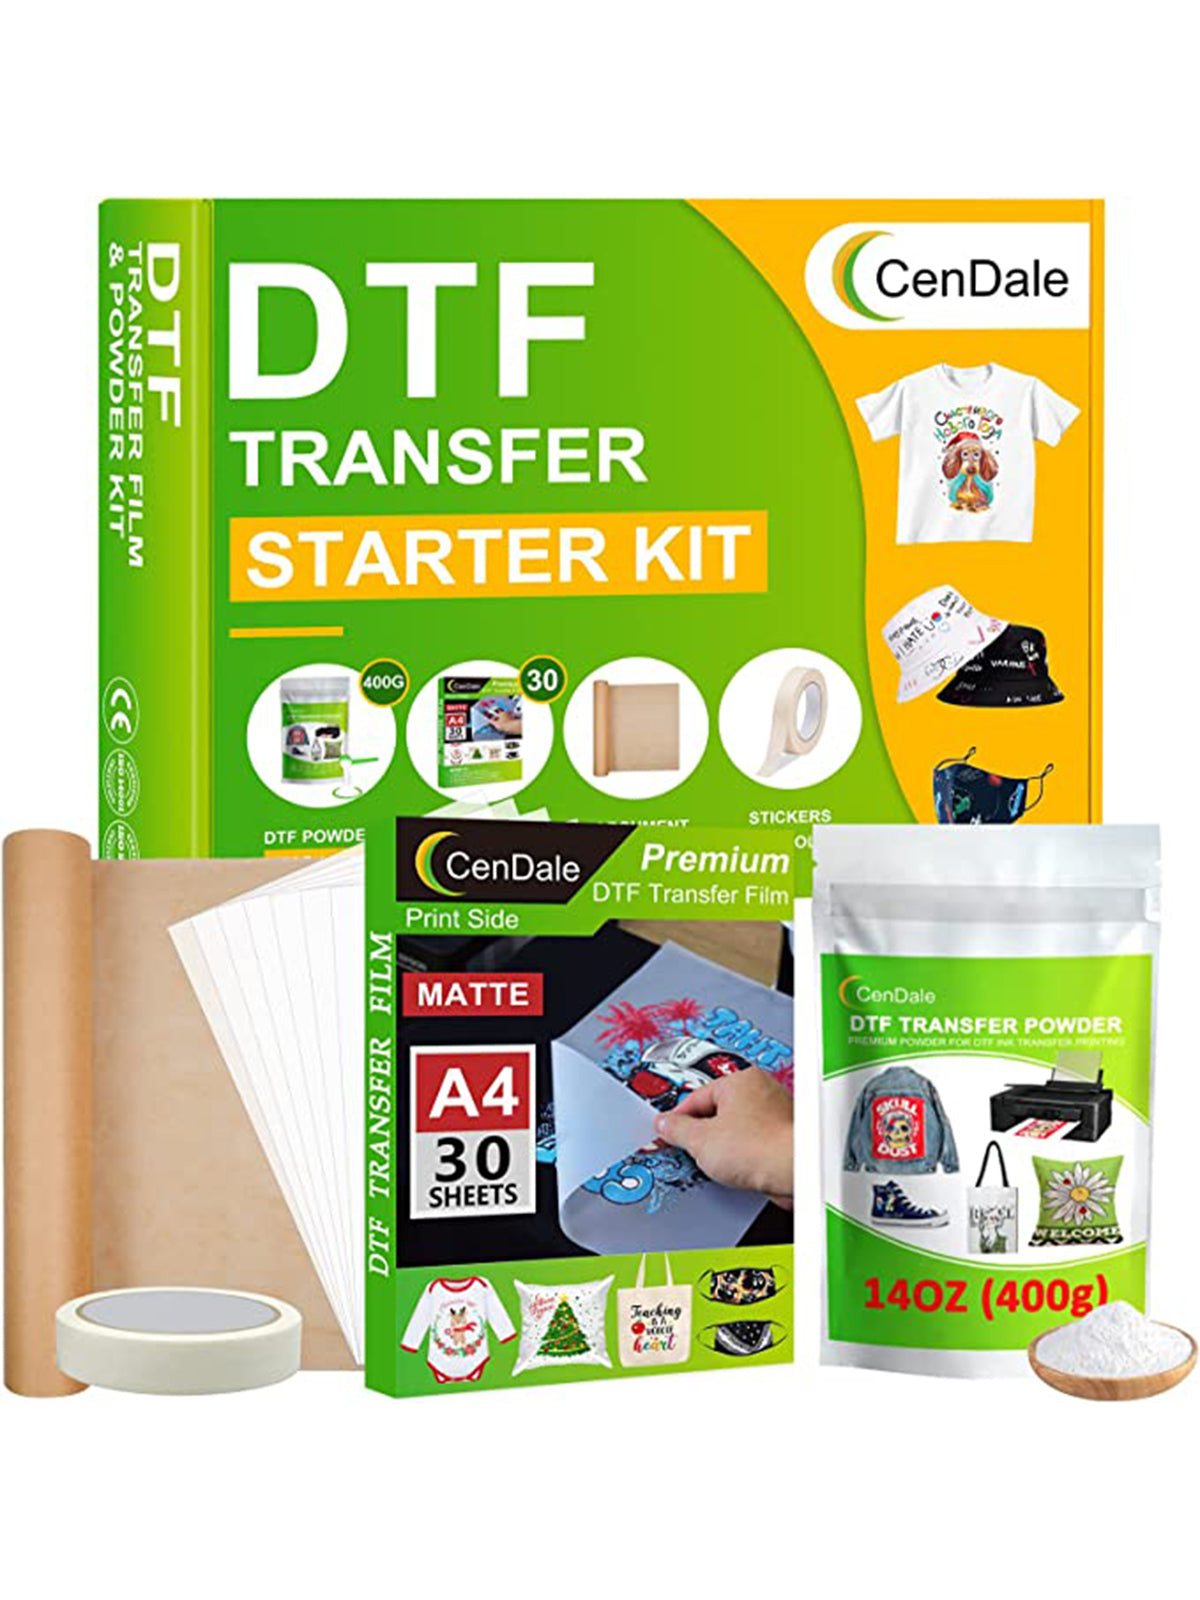 Using a Sublimation Printer to Make DTF Transfers with DTF Film